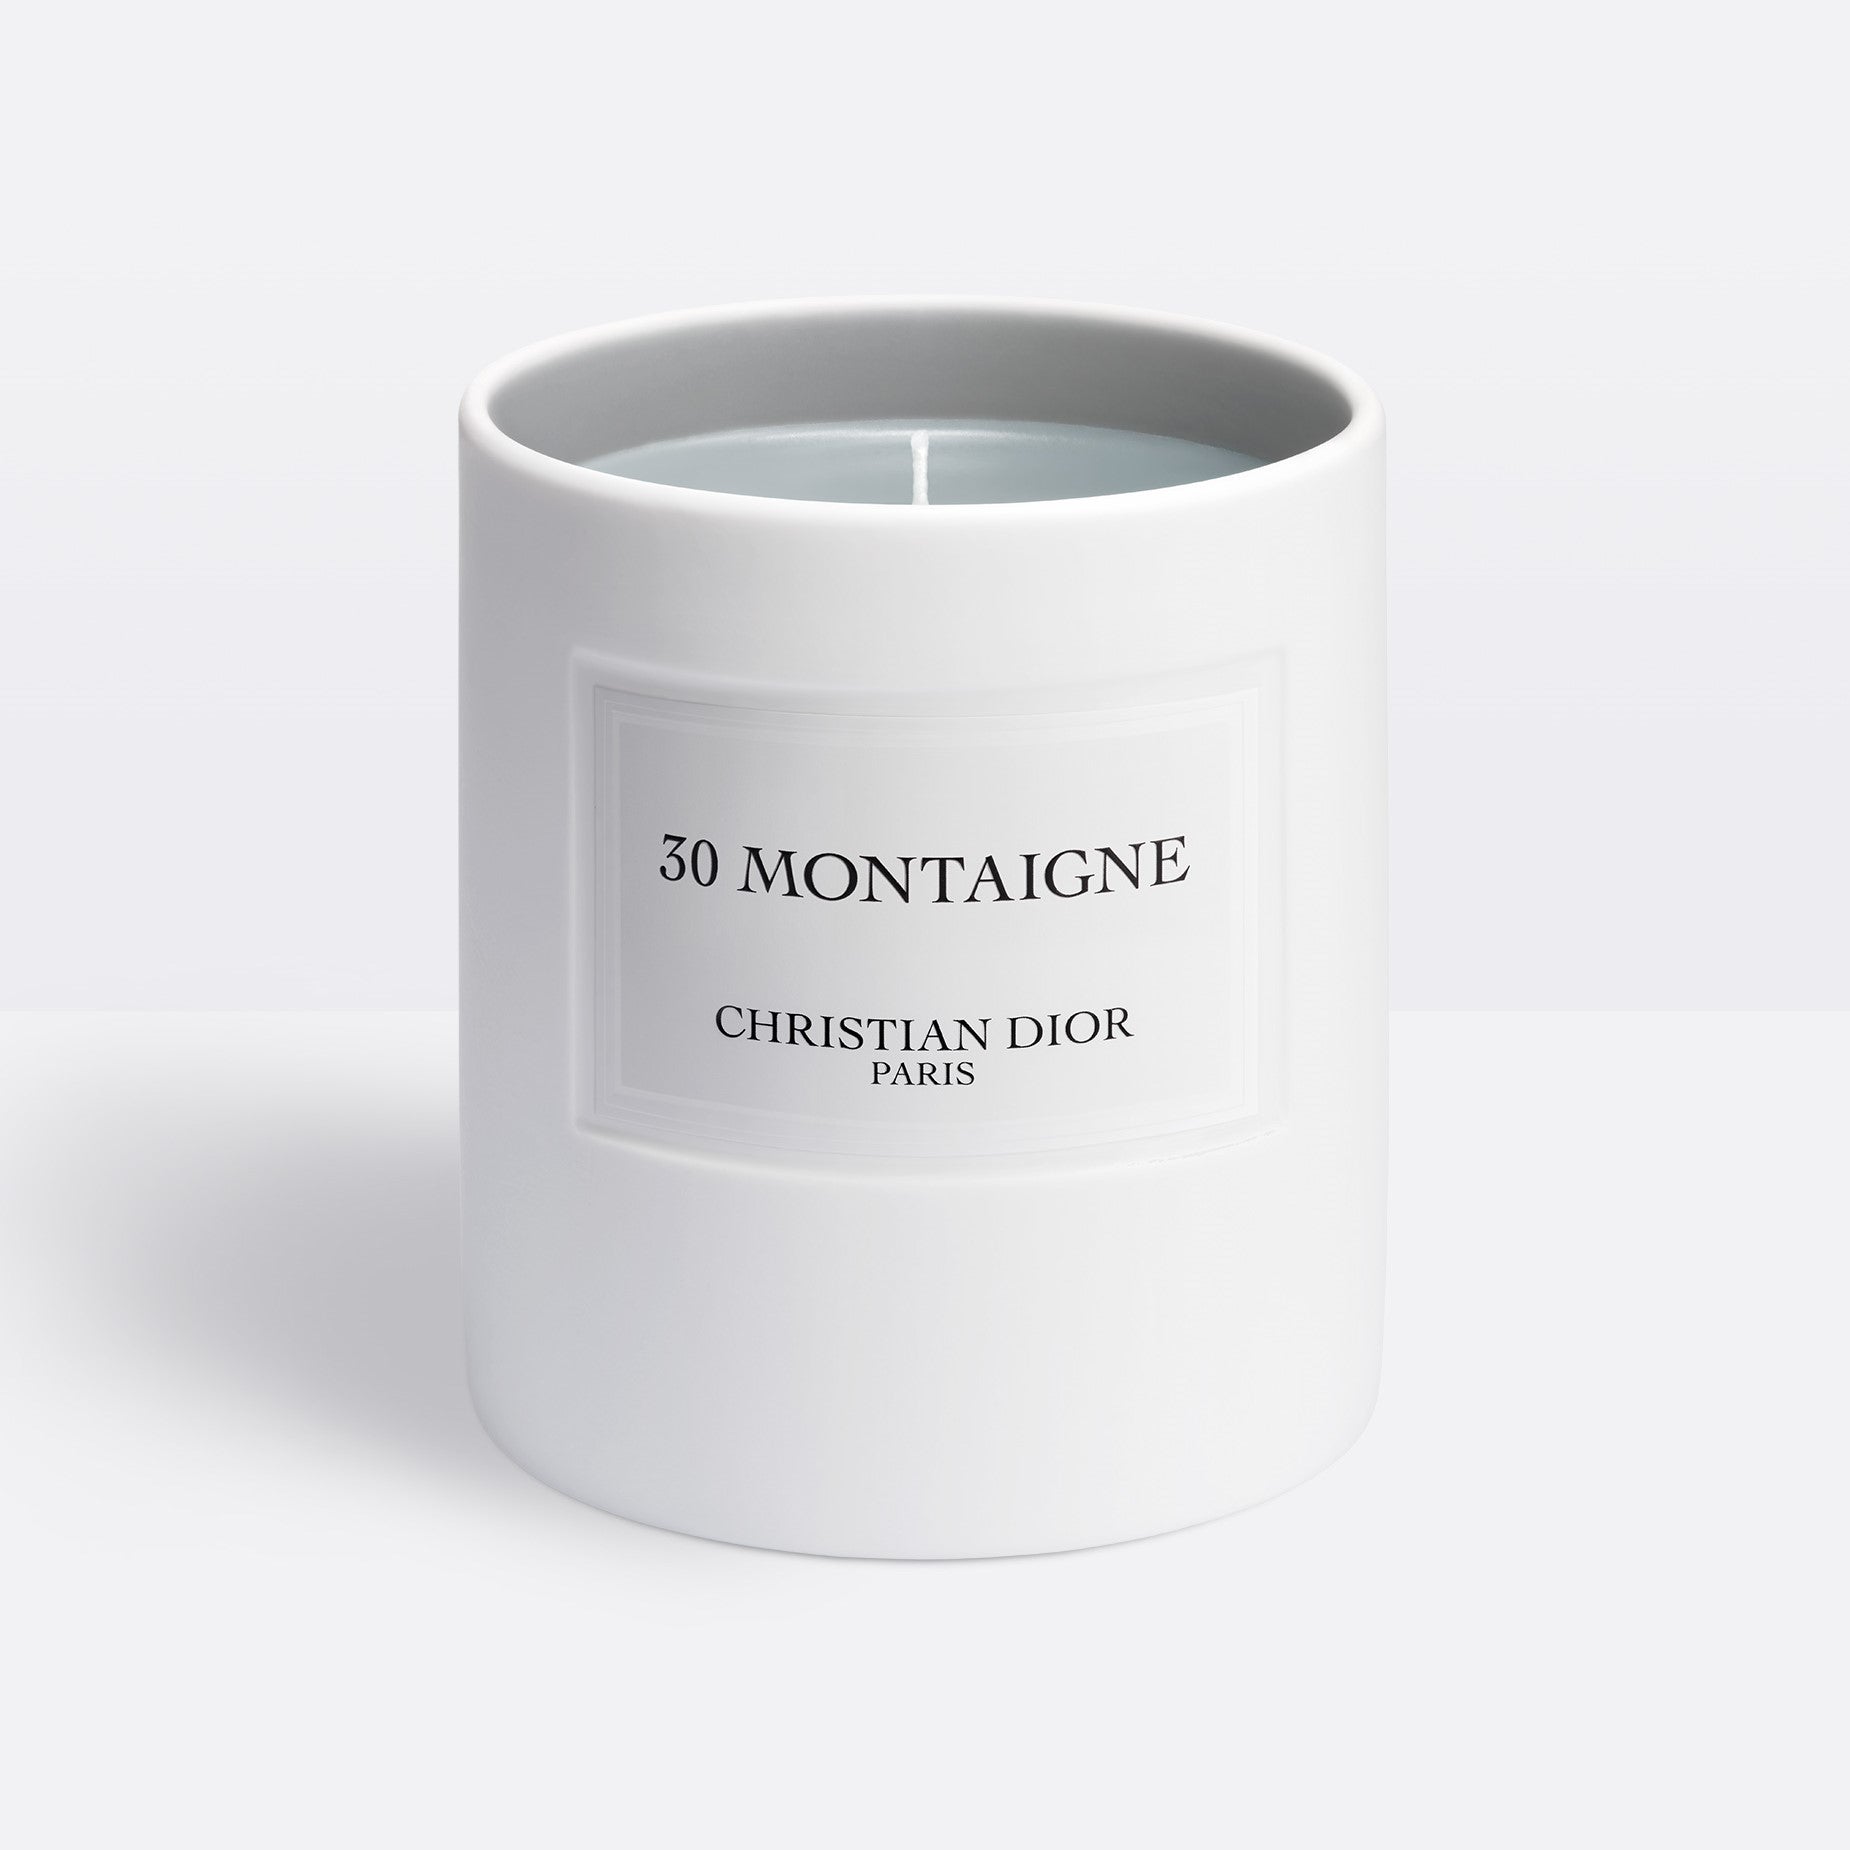 30 MONTAIGNE | Candle